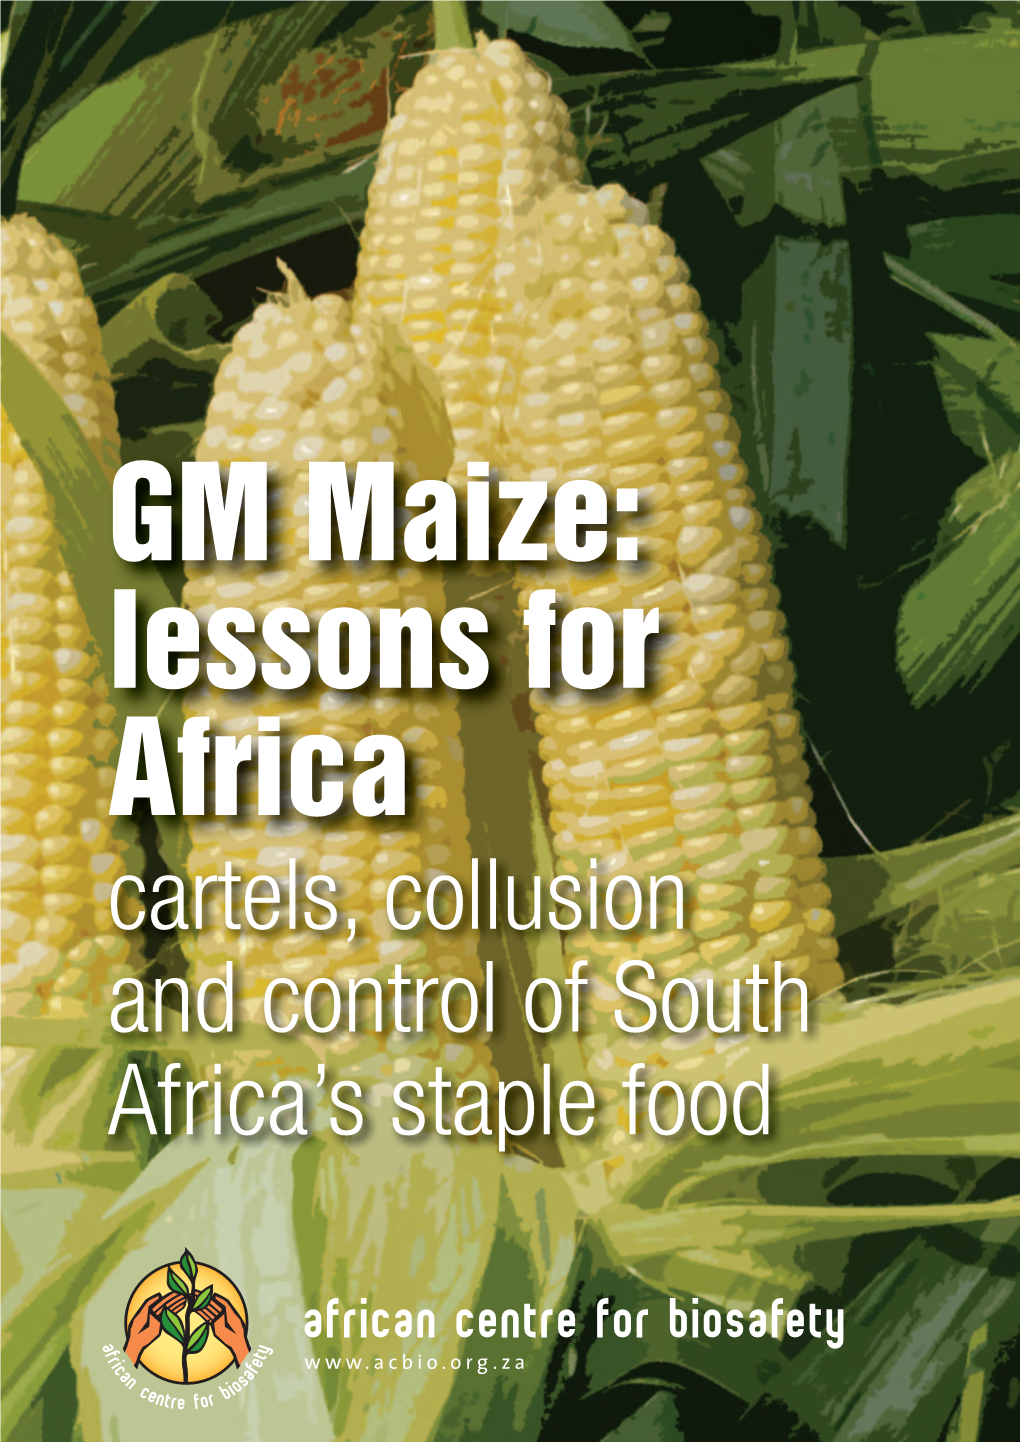 GM Maize Report New.Indd